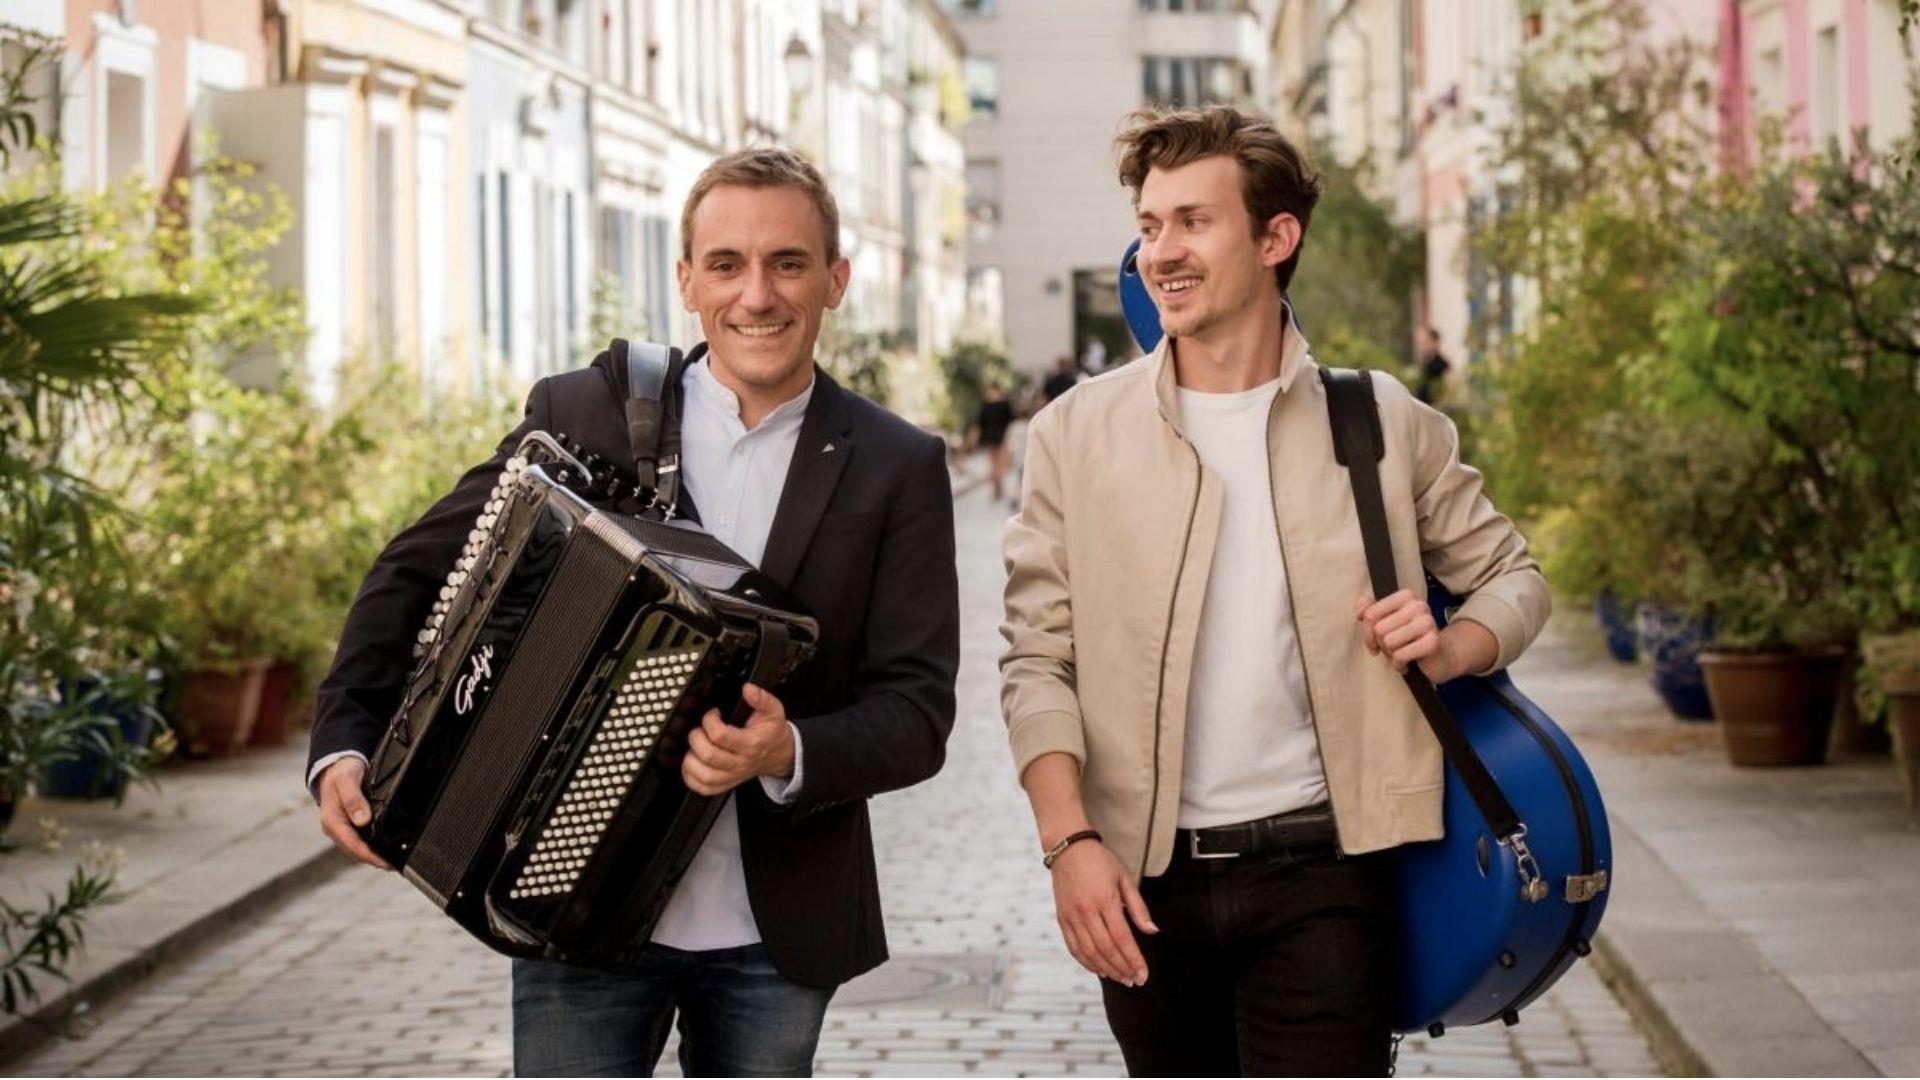 a photo of two men walking through a street holding an accordian and a guitar